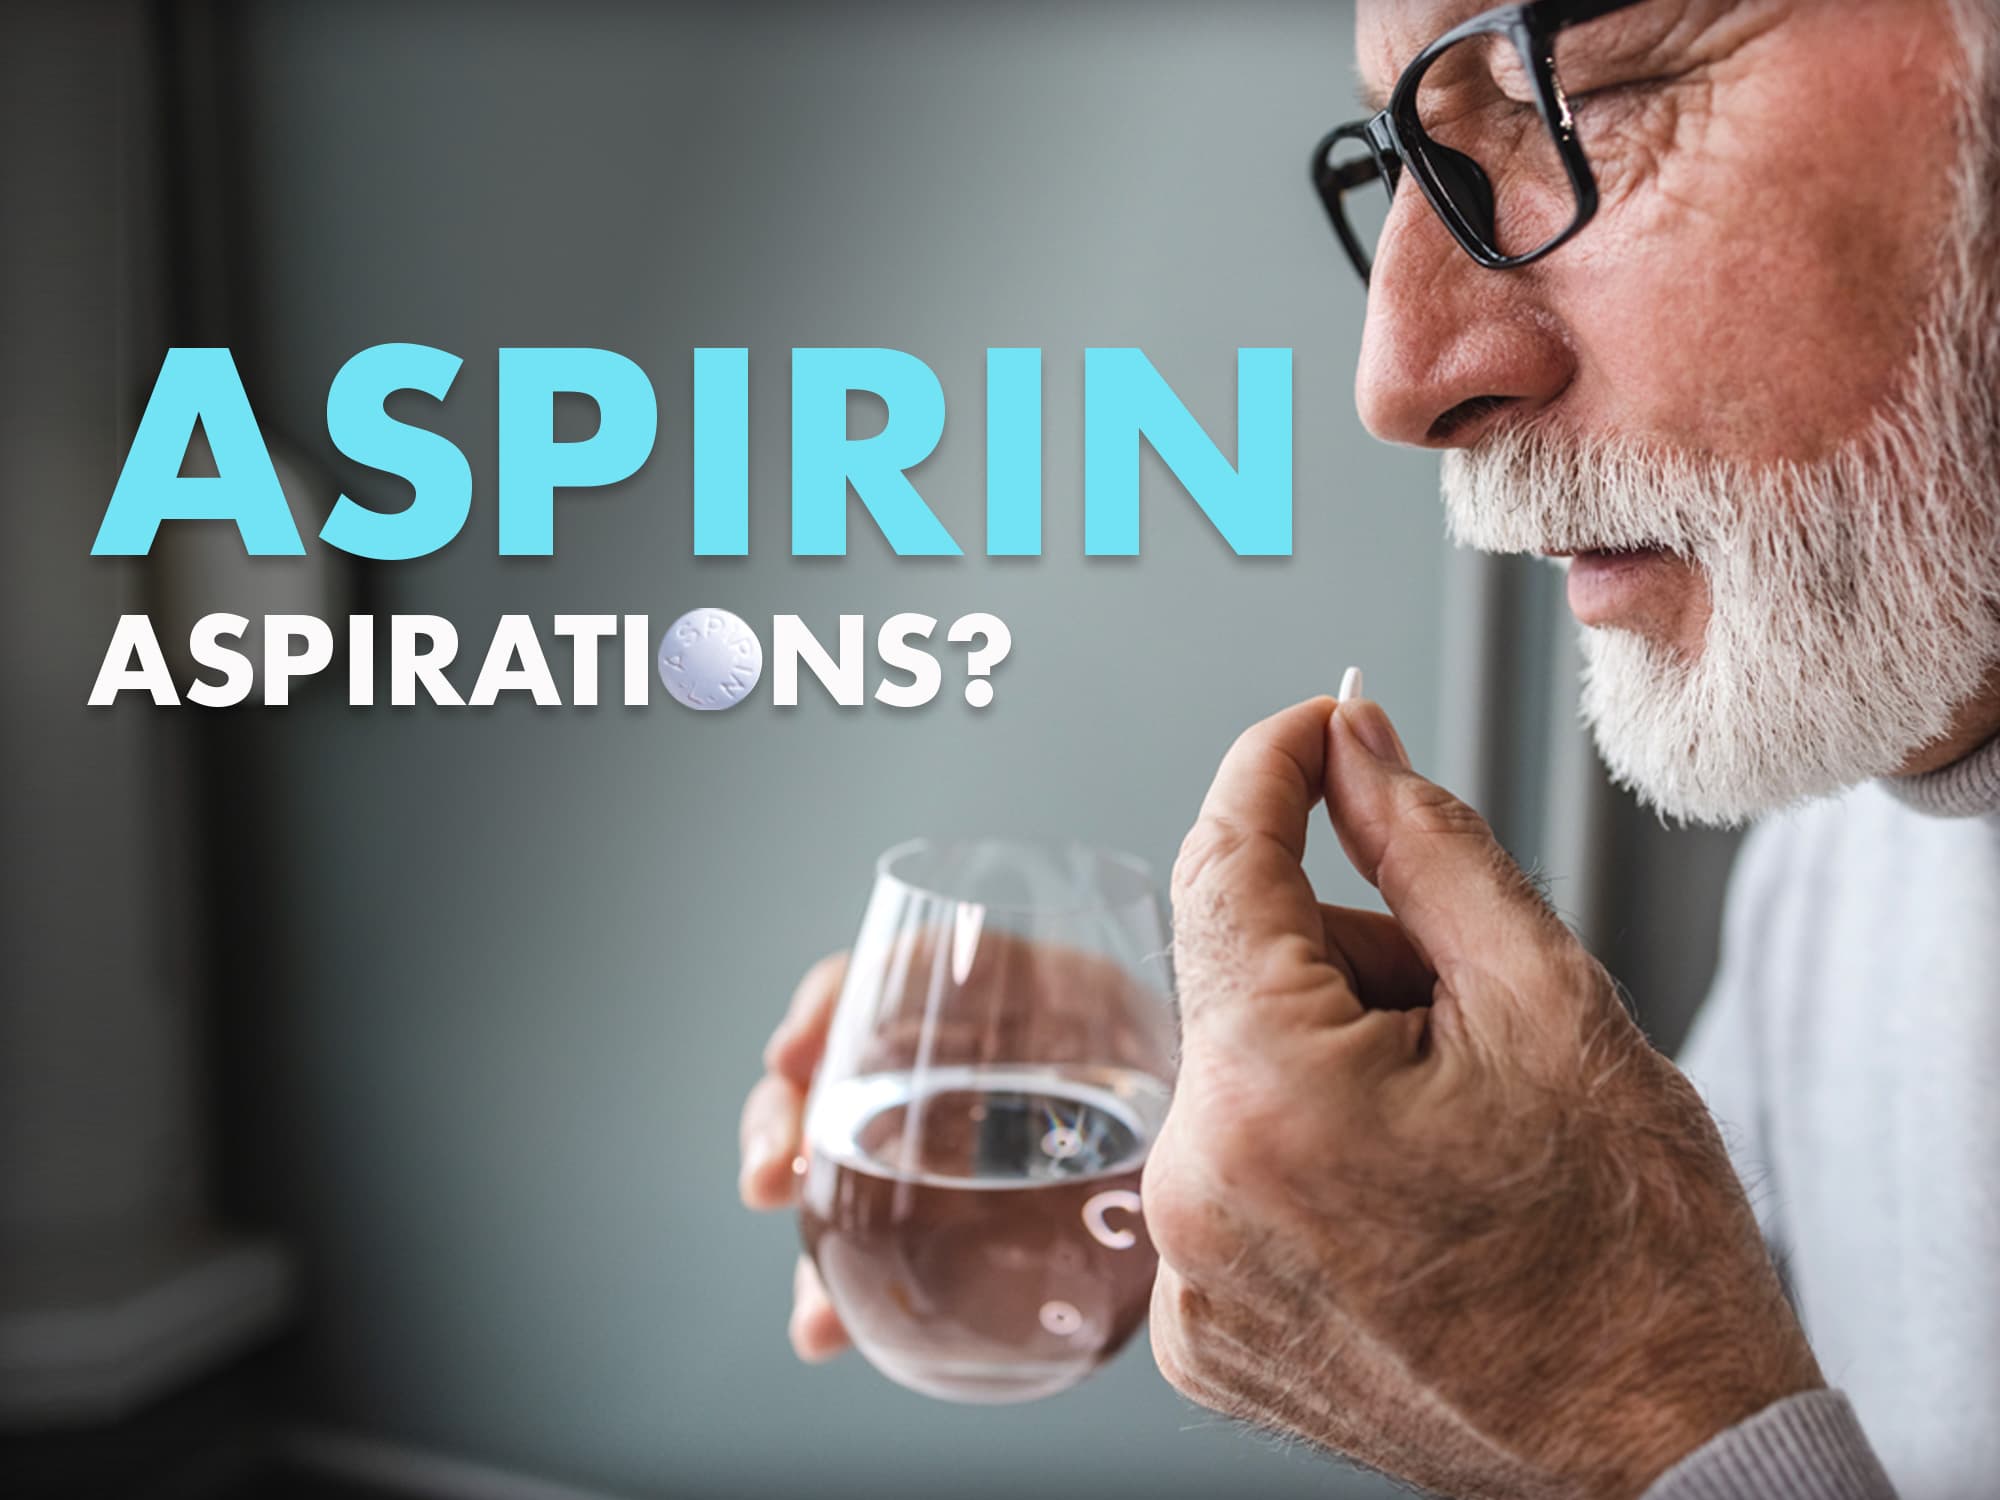 New aspirin guidelines suggest you may need to think twice